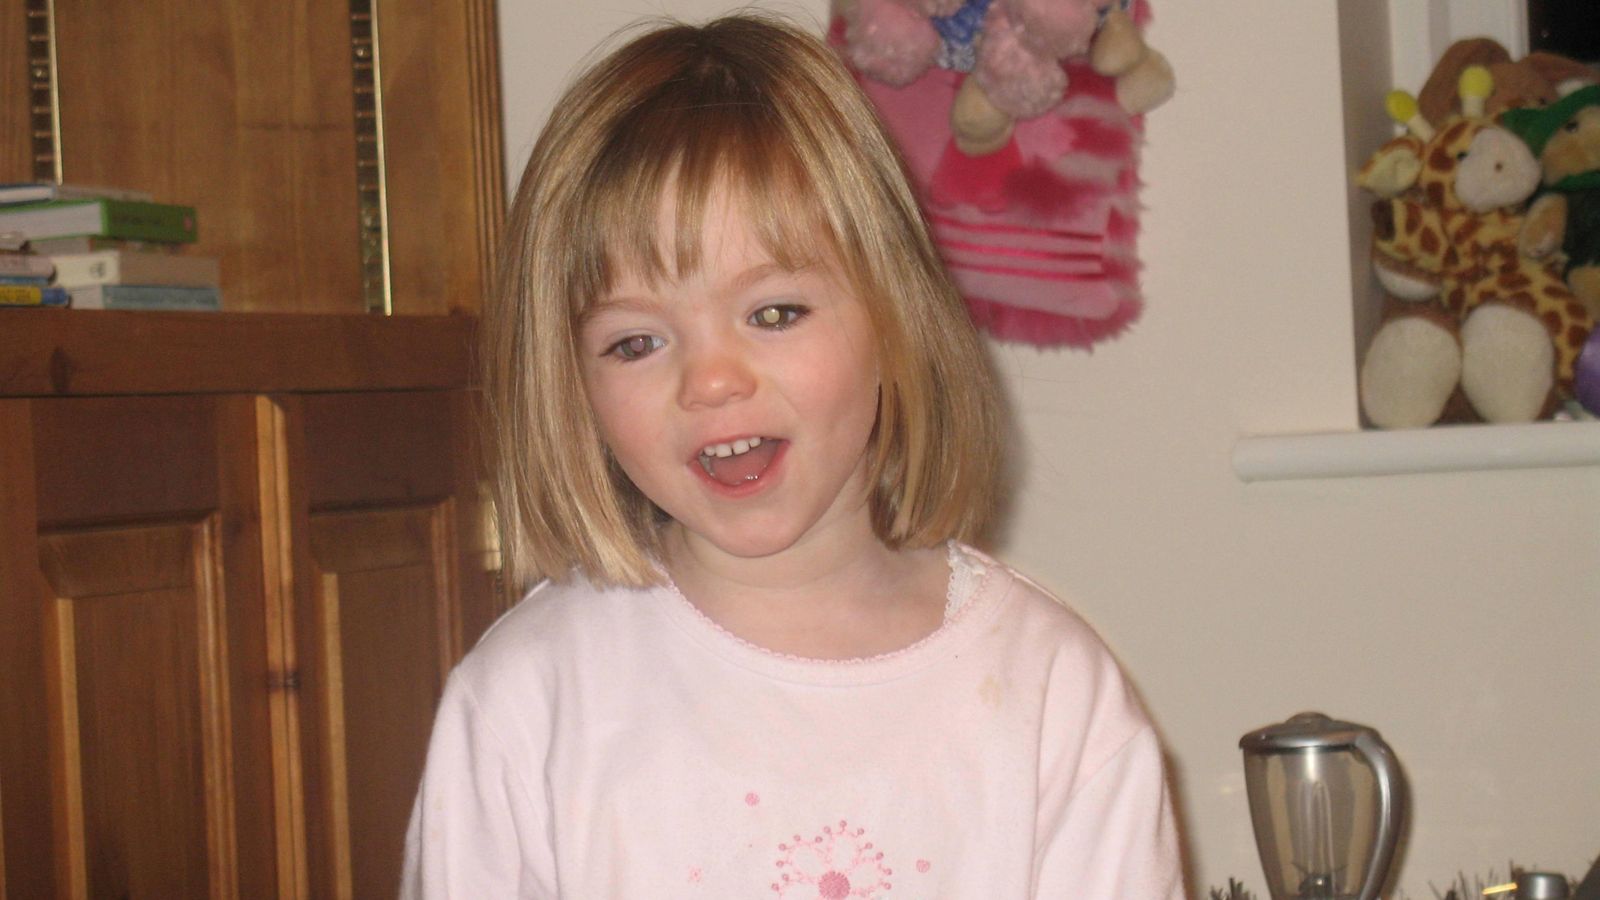 The latest McCann suspect: Scotland Yard has revealed vital new information about a suspect wanted in connection with the disappearance of Madeleine McCann. Skynews-madeleine-mccann-missing-girl_5005120